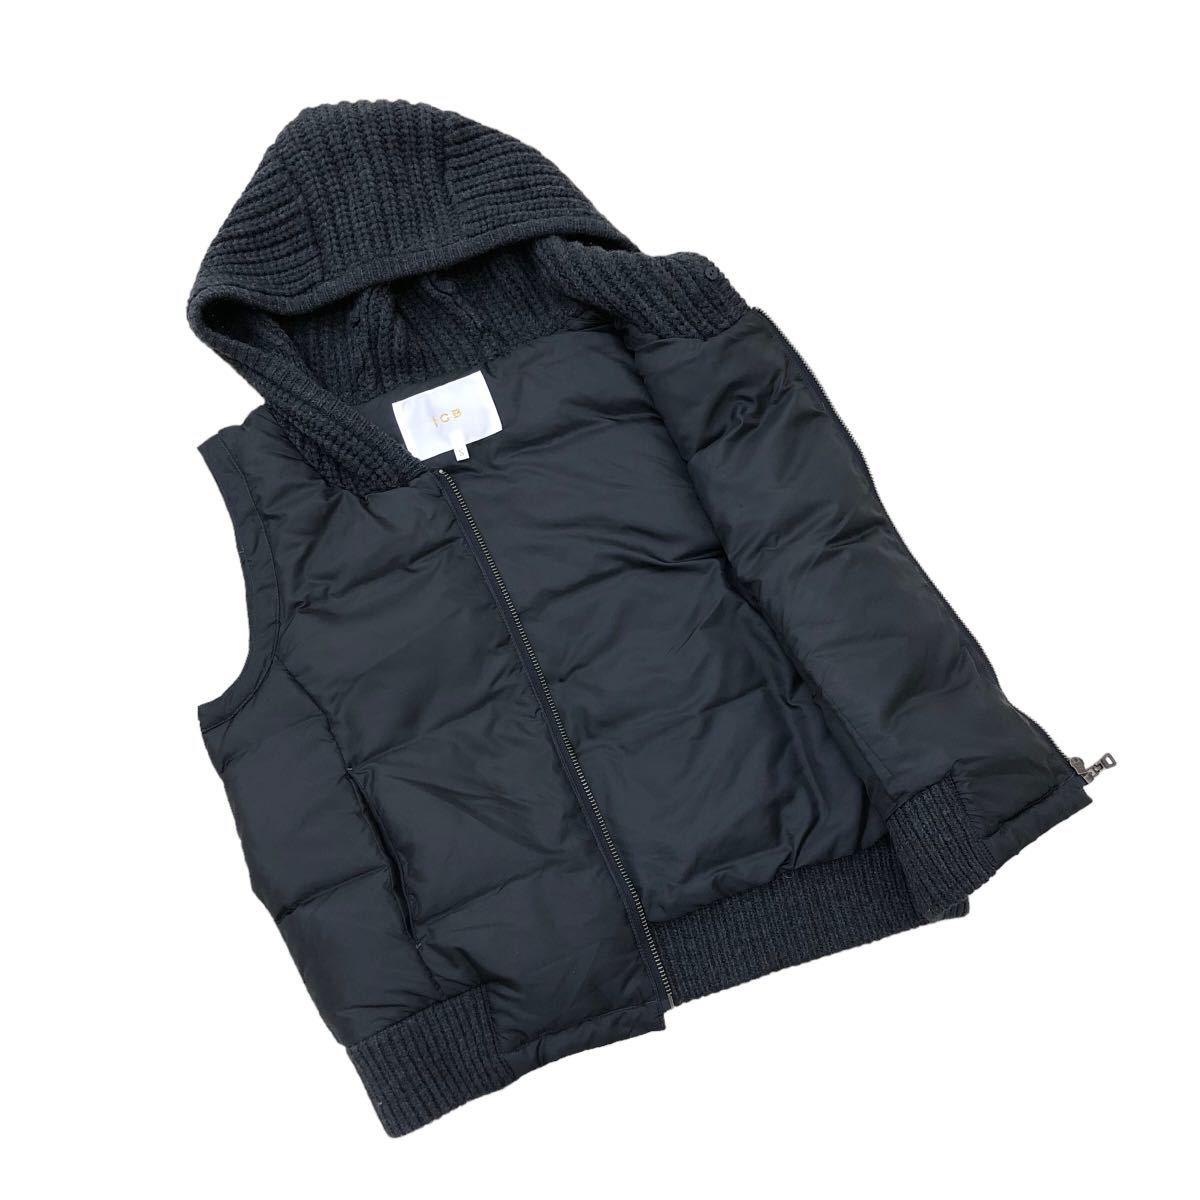 NB160 iCB I si- Be cotton inside down vest hood knitted unusual material design outer outer garment feather weave gray lady's S Onward . mountain 